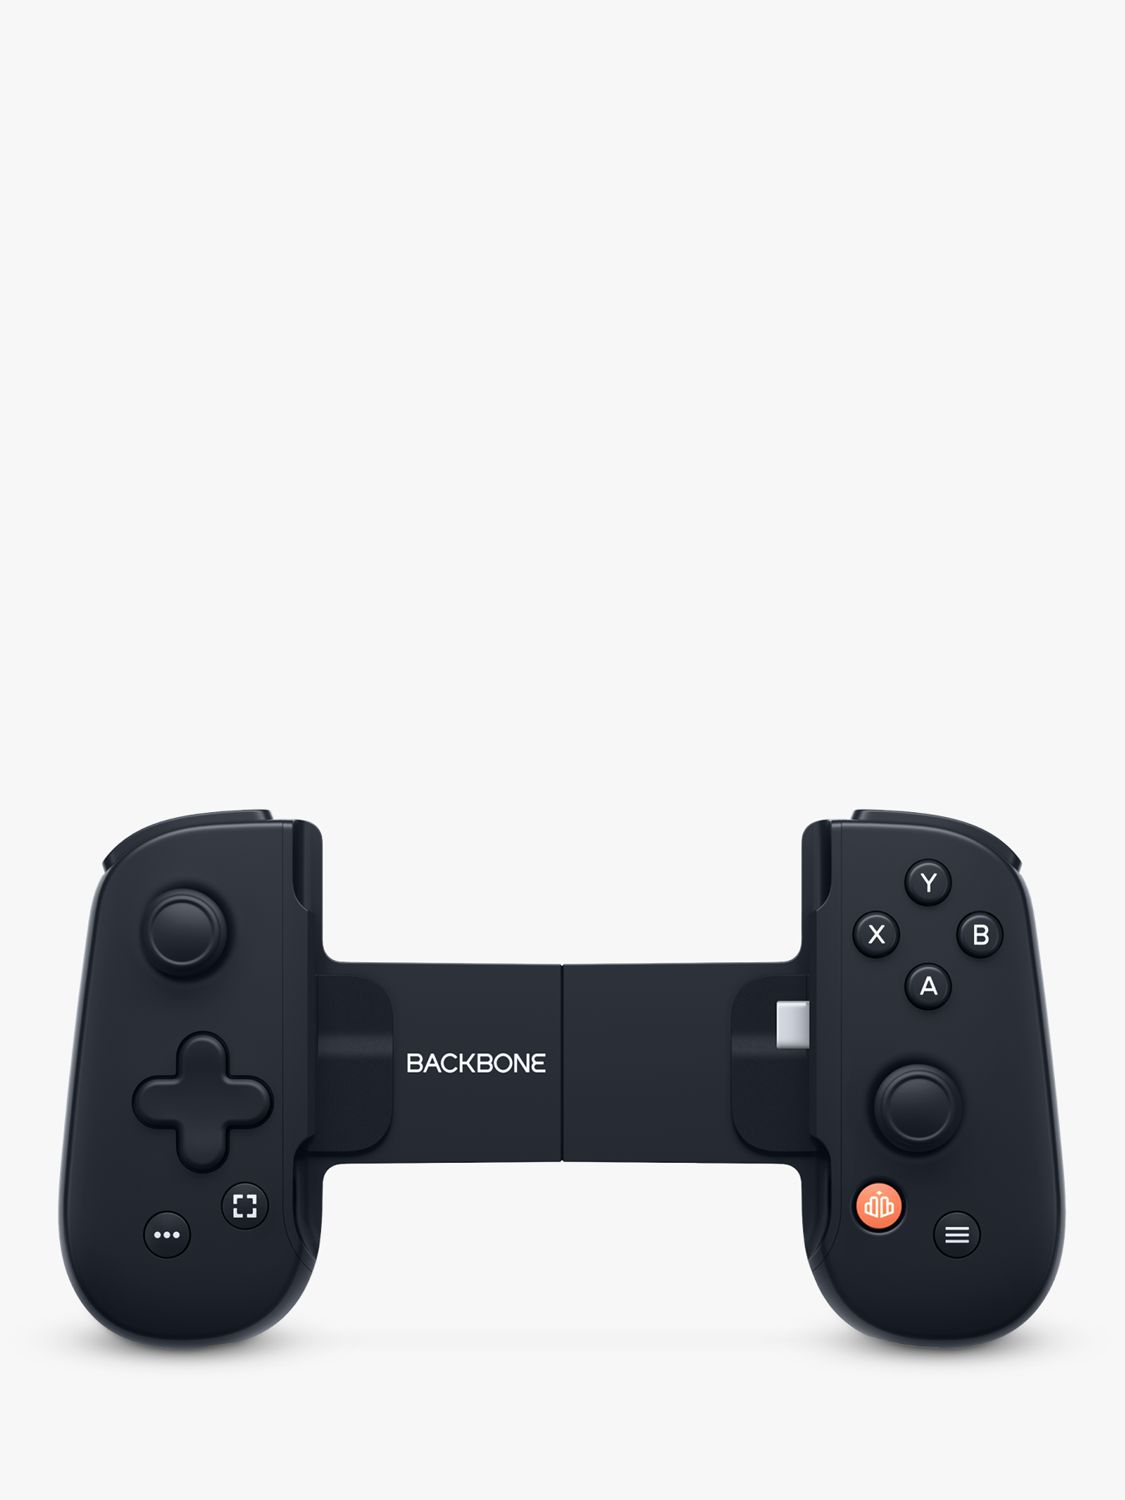 Backbone One Mobile Gaming Controller for Android, USB-C Connection, Black